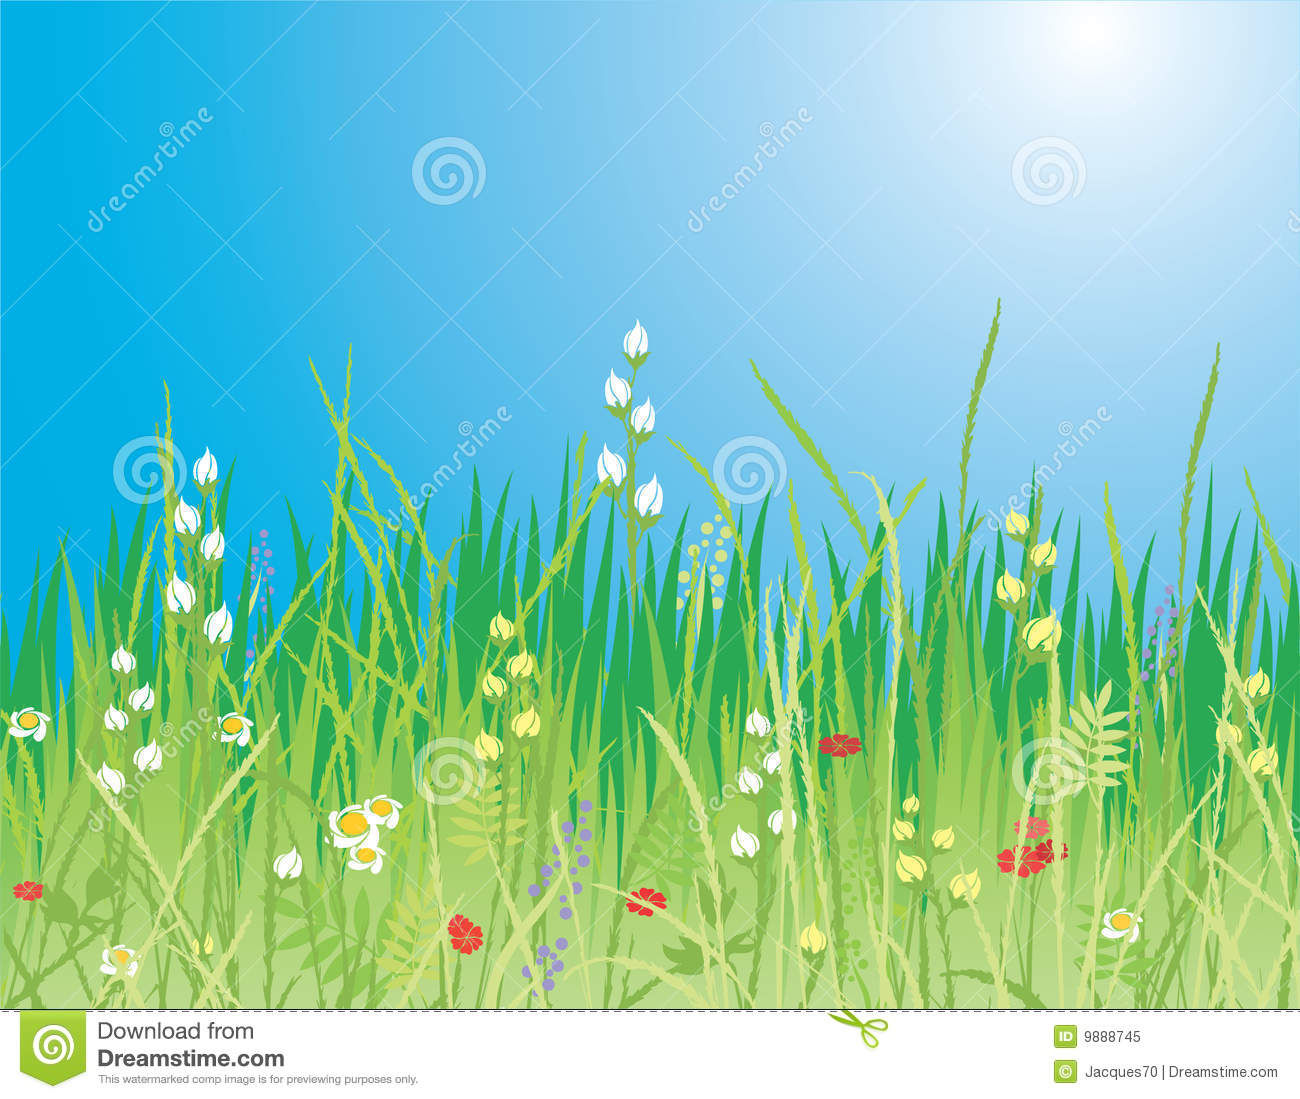 Spring Flowers and Grass